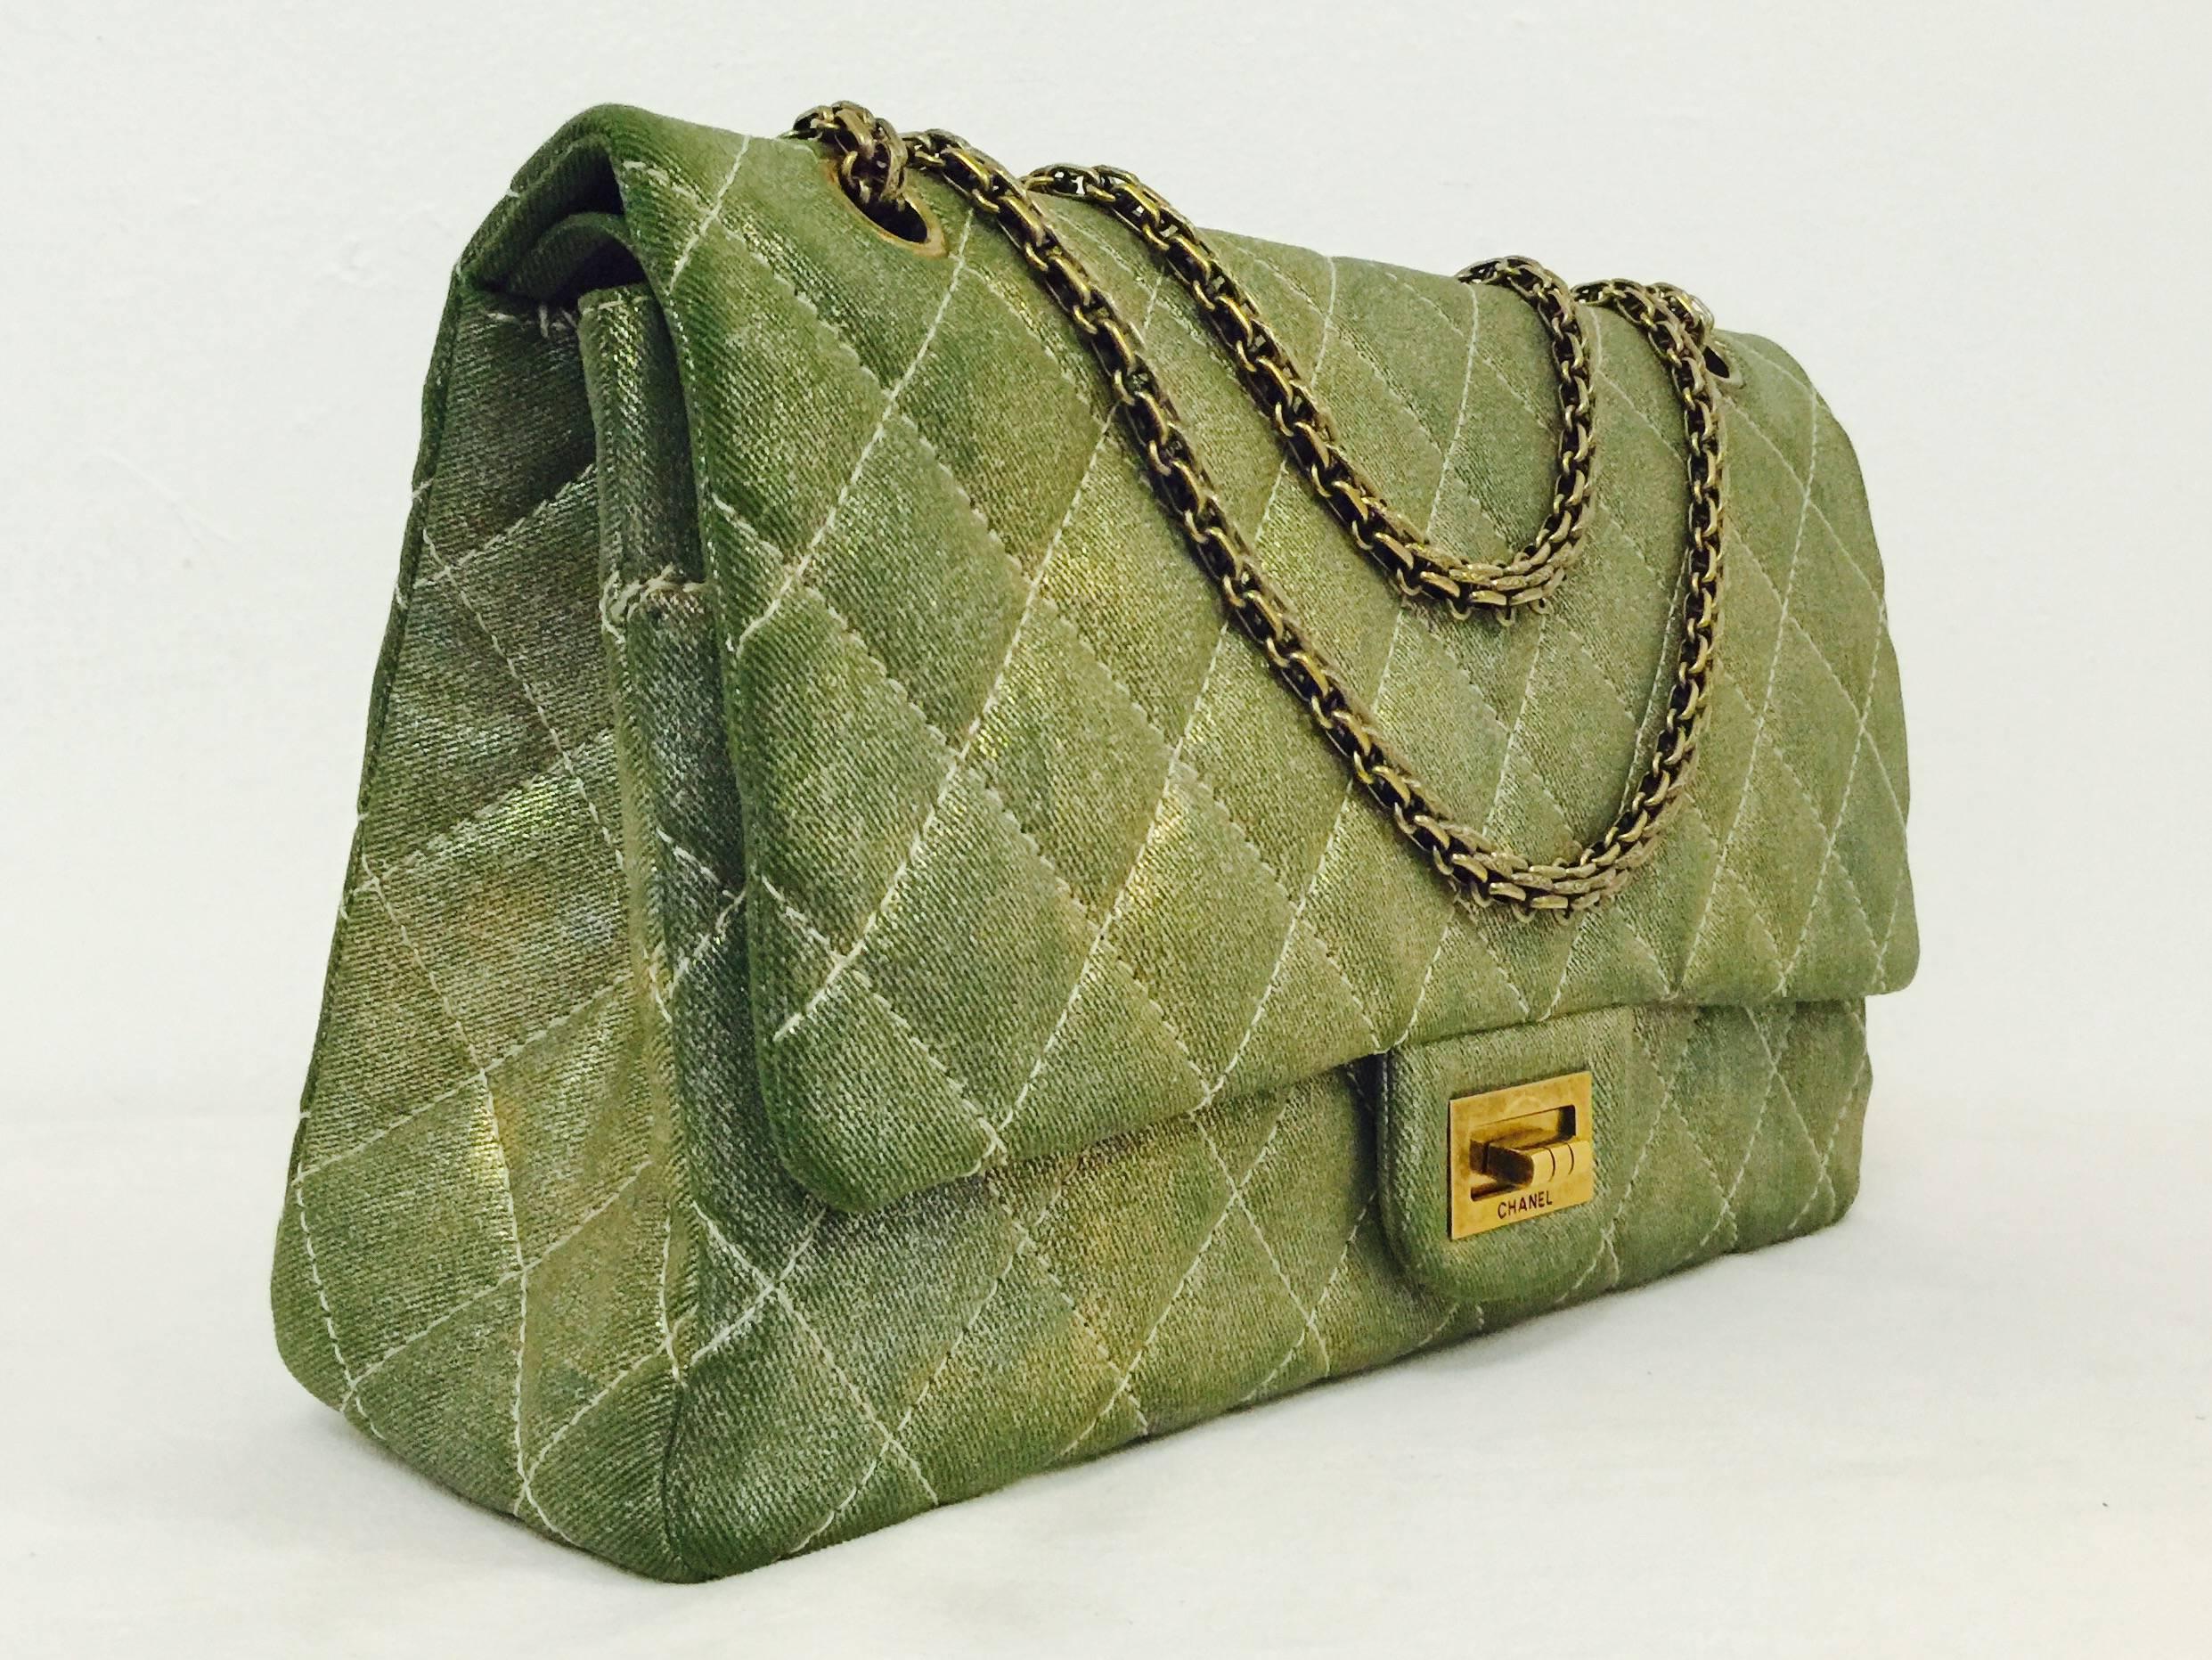  Chanel Ltd Edition 2.55 Reissue 227 is a must for collectors of all things Coco!  When crafted from diamond quilted green and gold metallic fabric, the classic Chanel bag becomes trendy and timeless at the same time!   It's all here. Double bijoux